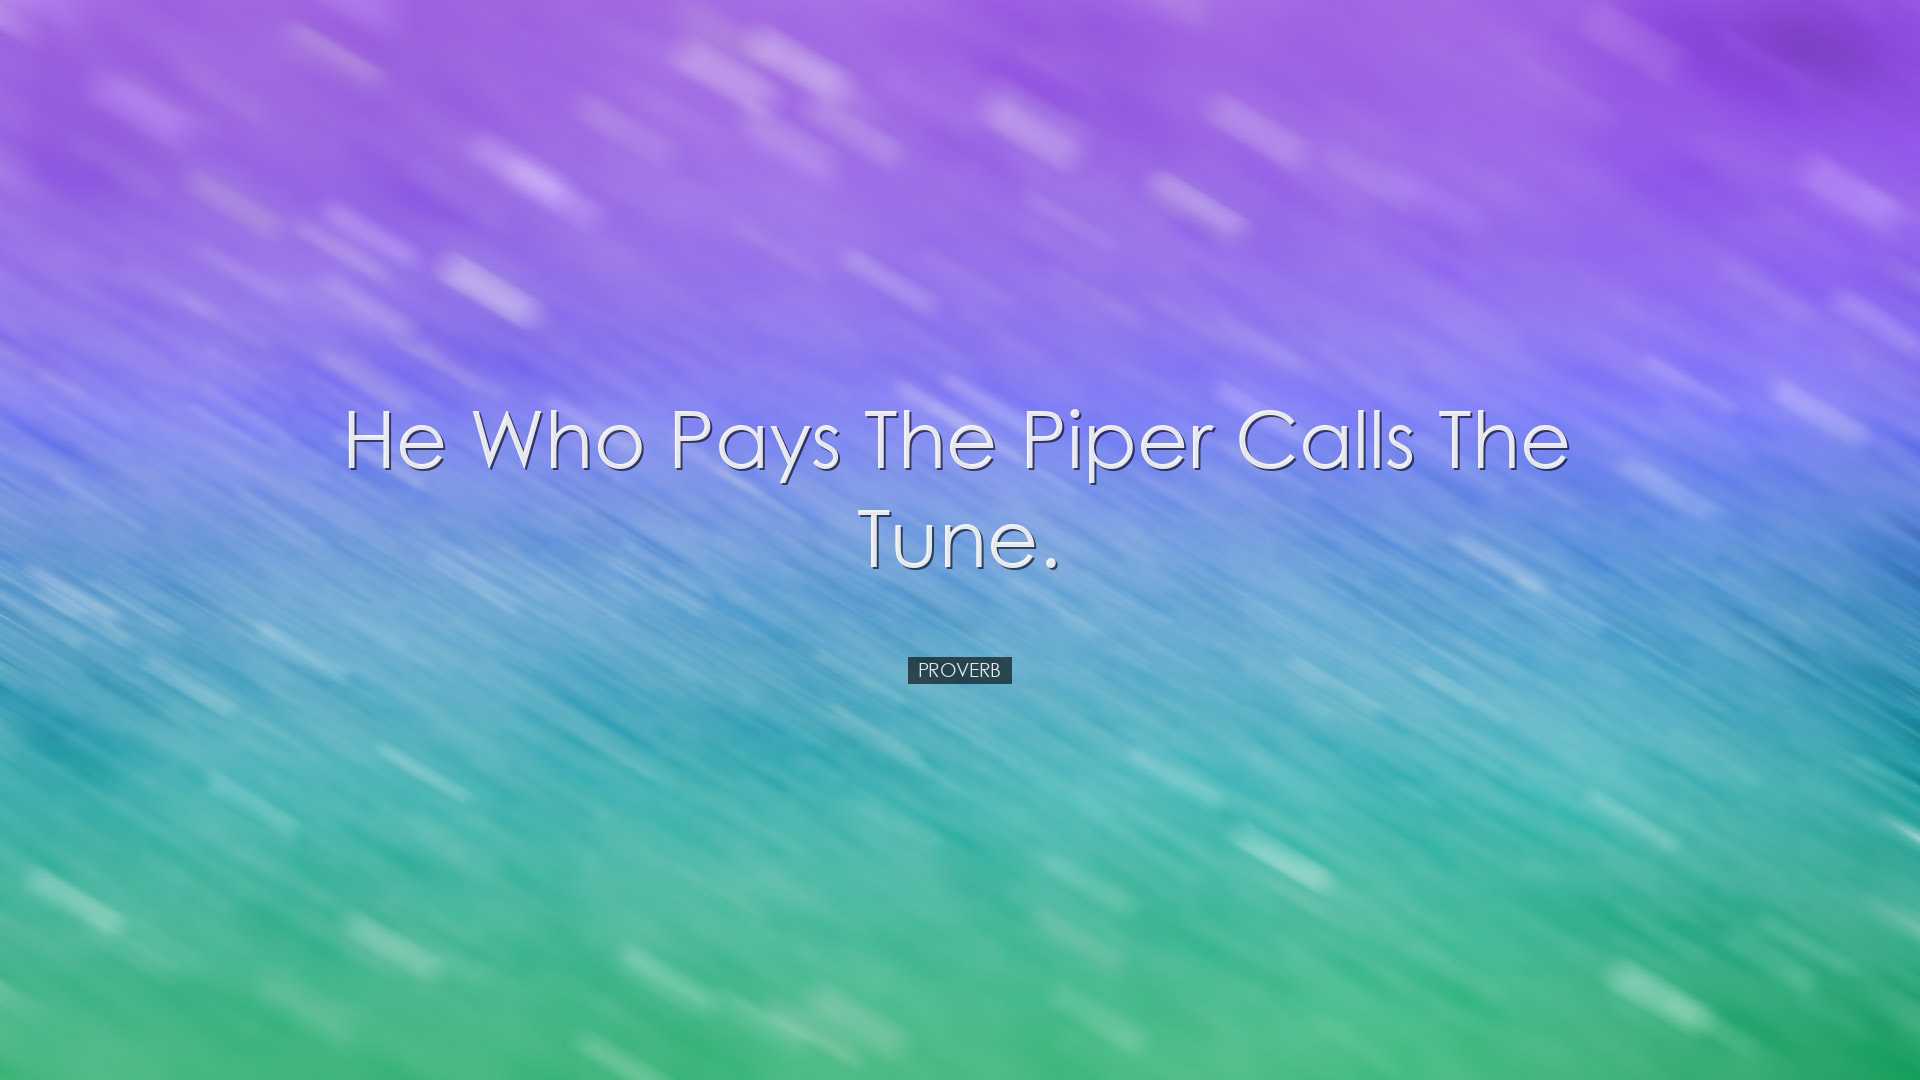 He who pays the piper calls the tune. - Proverb